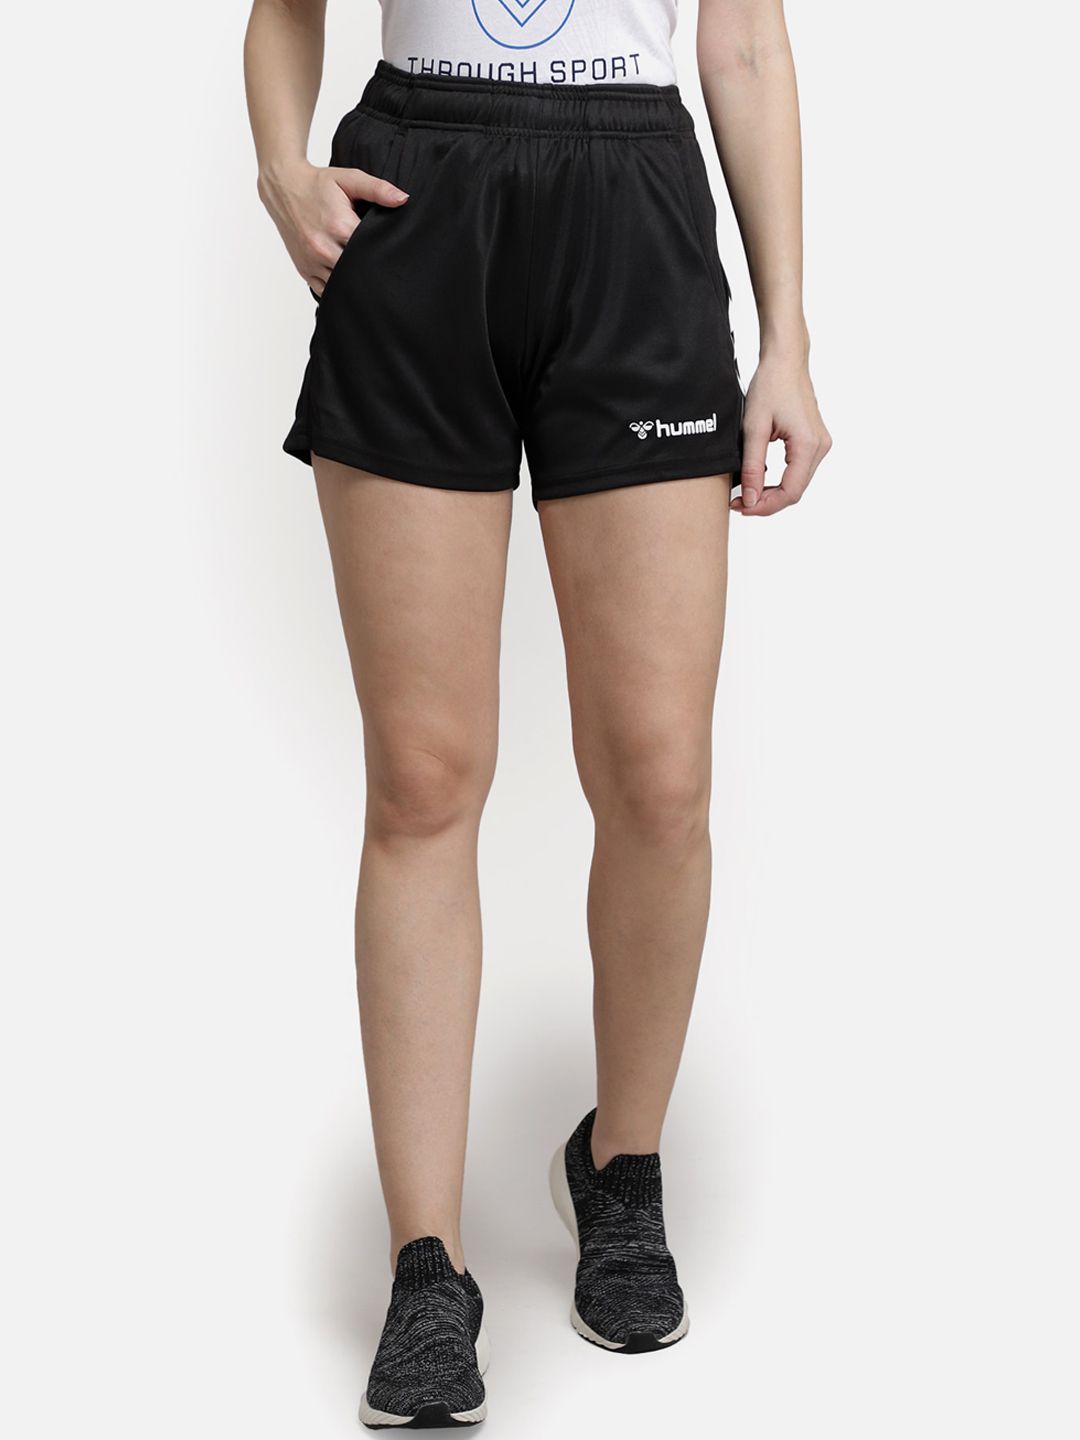 hummel Women Black Mid-Rise Sports Shorts Price in India